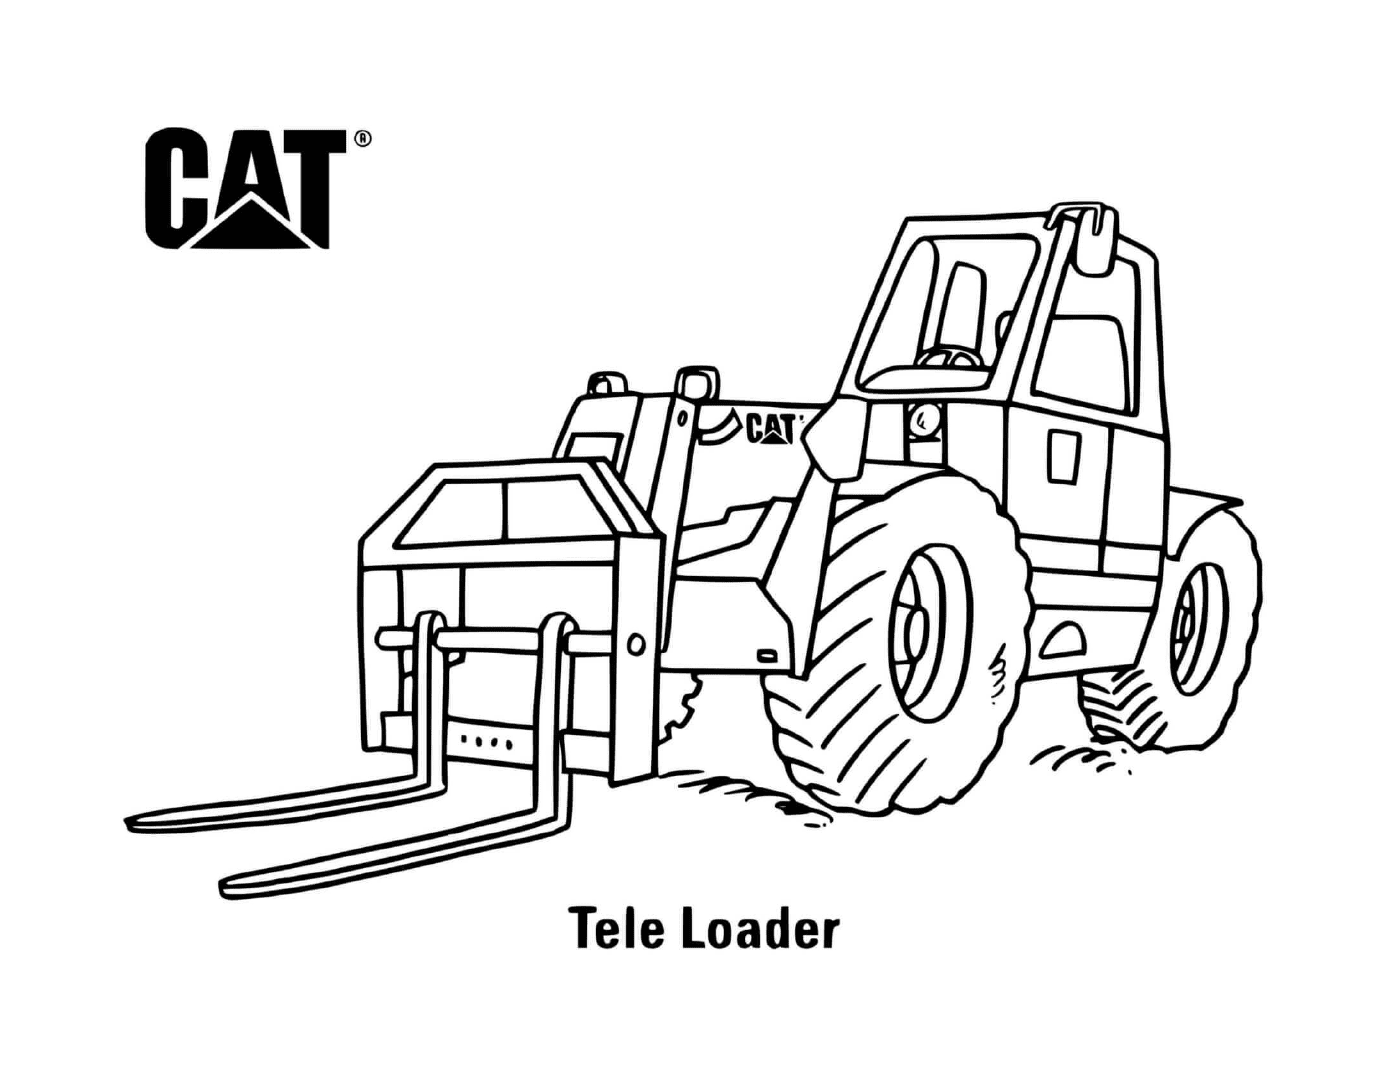  CAT telescopic loader used on a construction site 